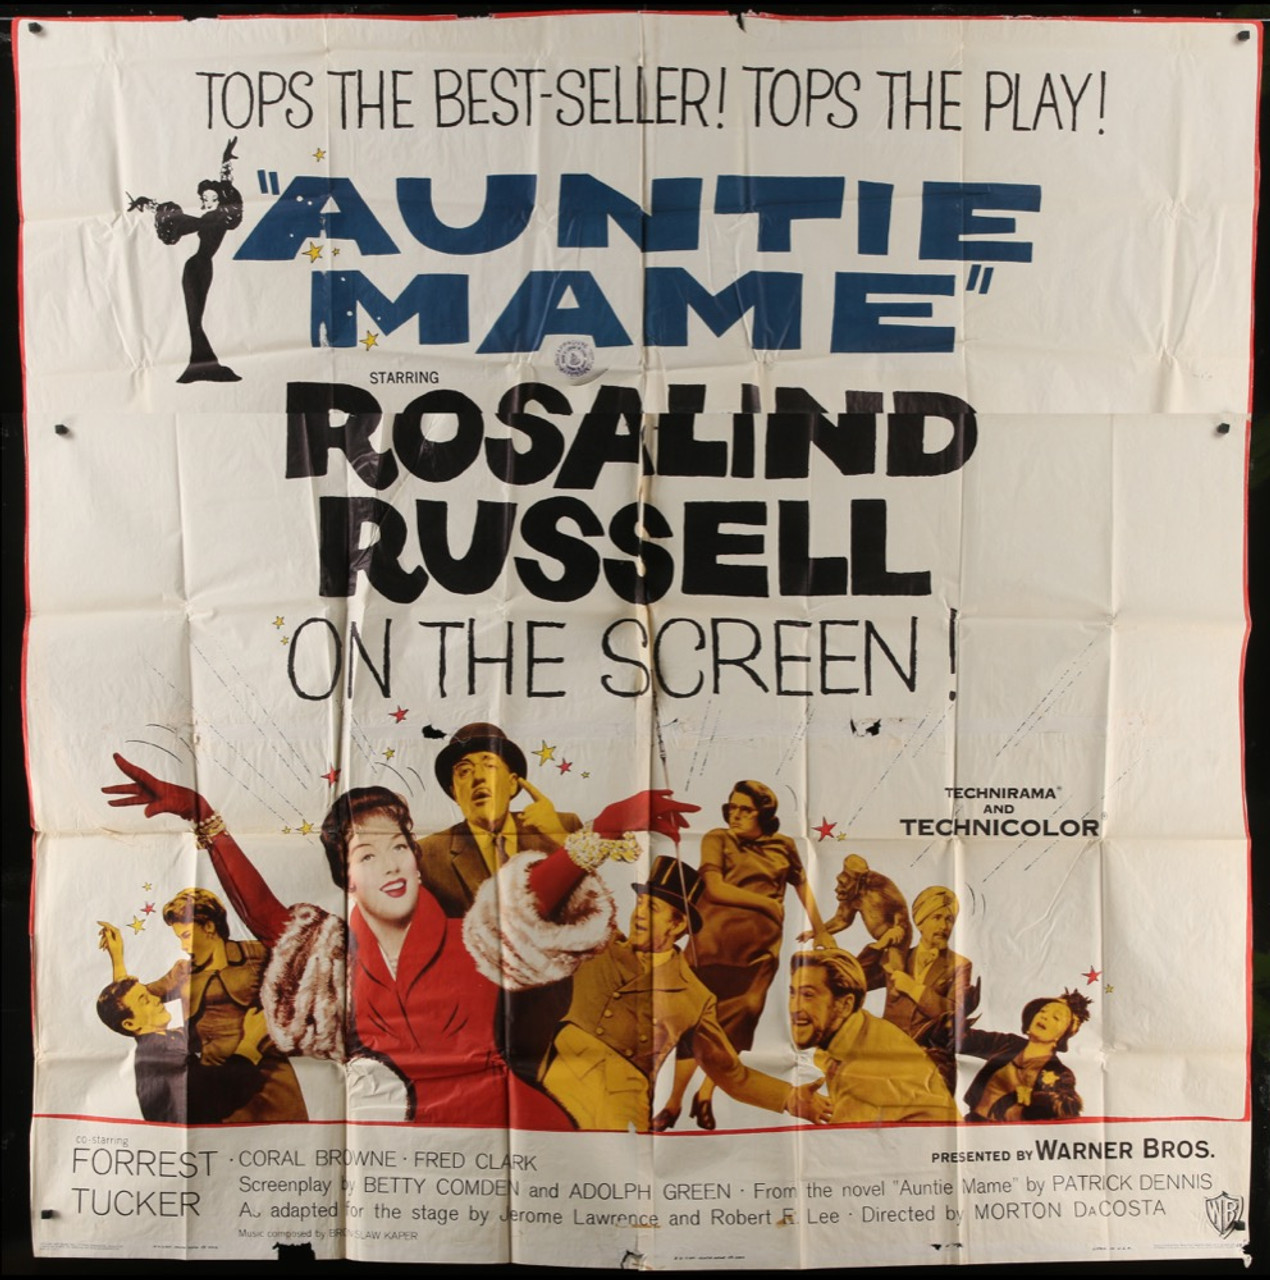 Original Auntie Mame (1958) movie poster in C7 condition for $250.00